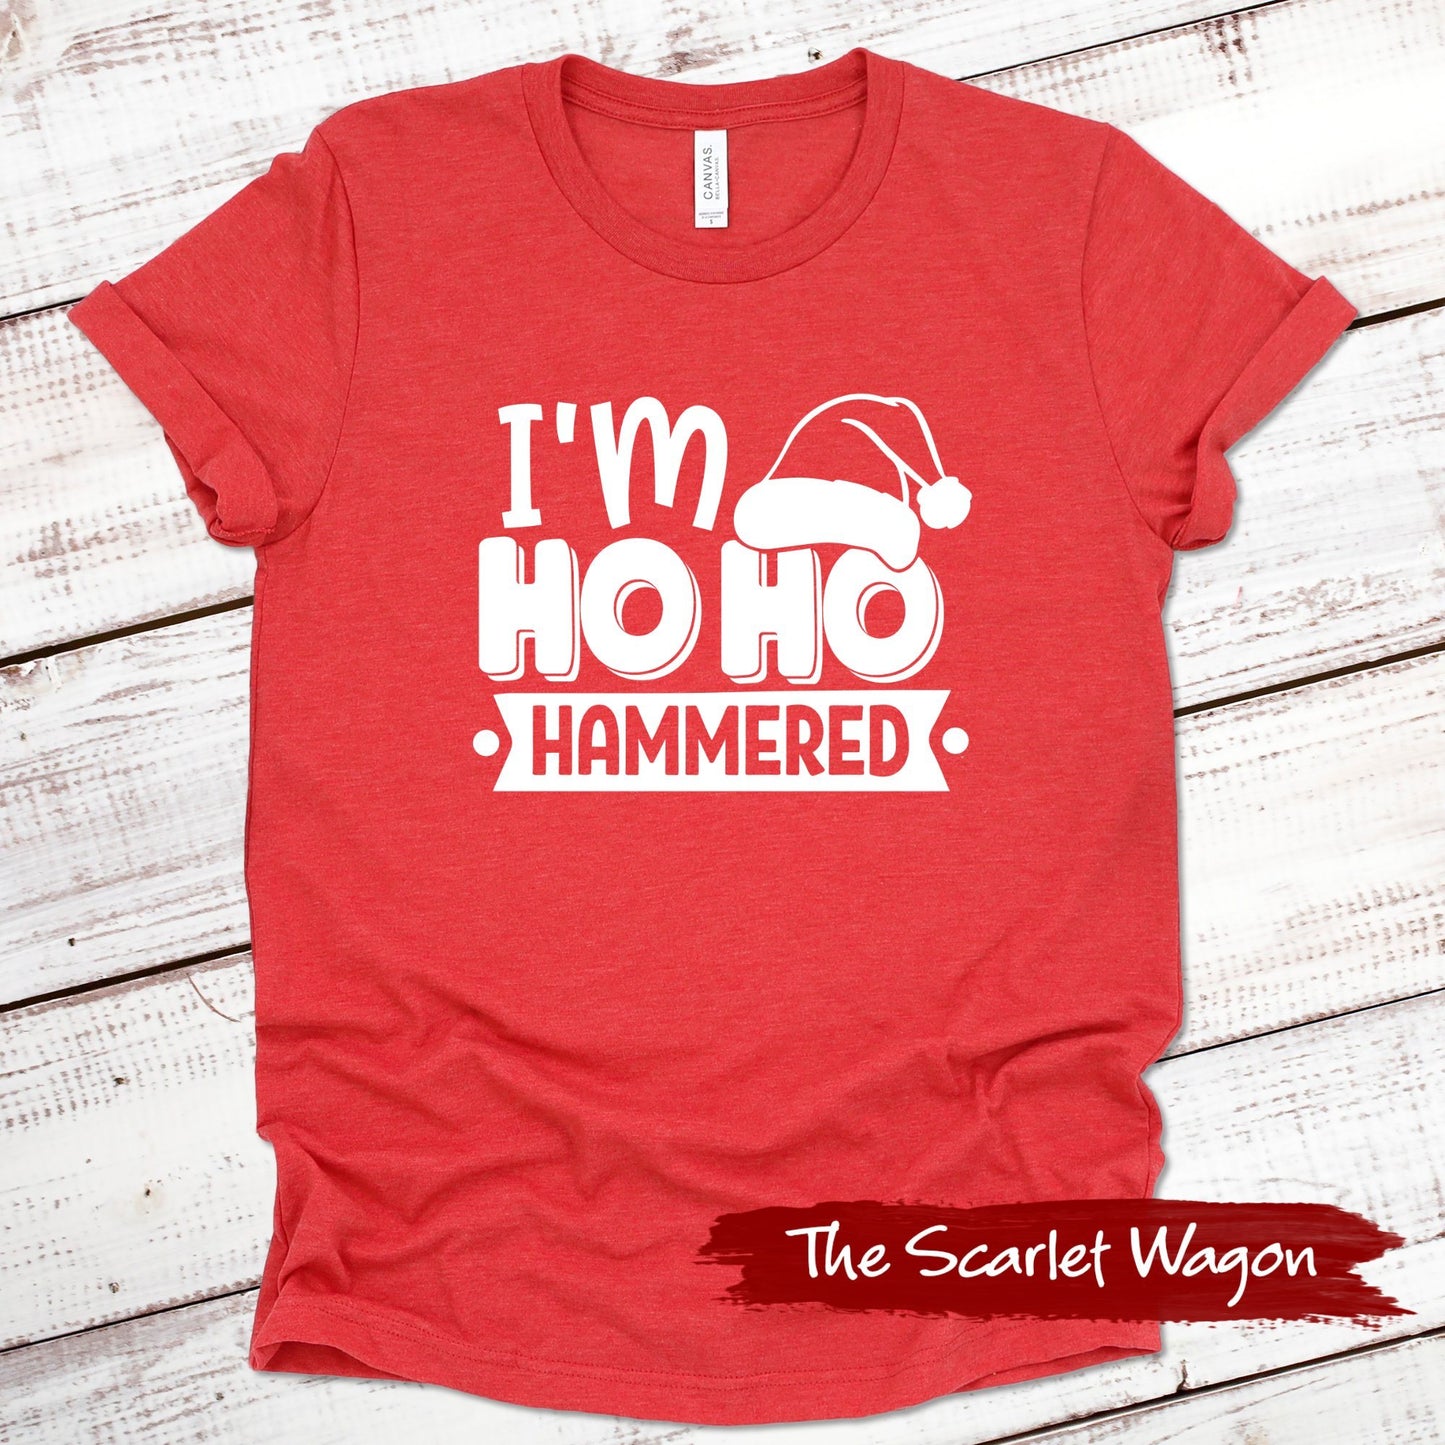 Ho Ho Hammered Christmas Shirt Scarlet Wagon Heather Red XS 